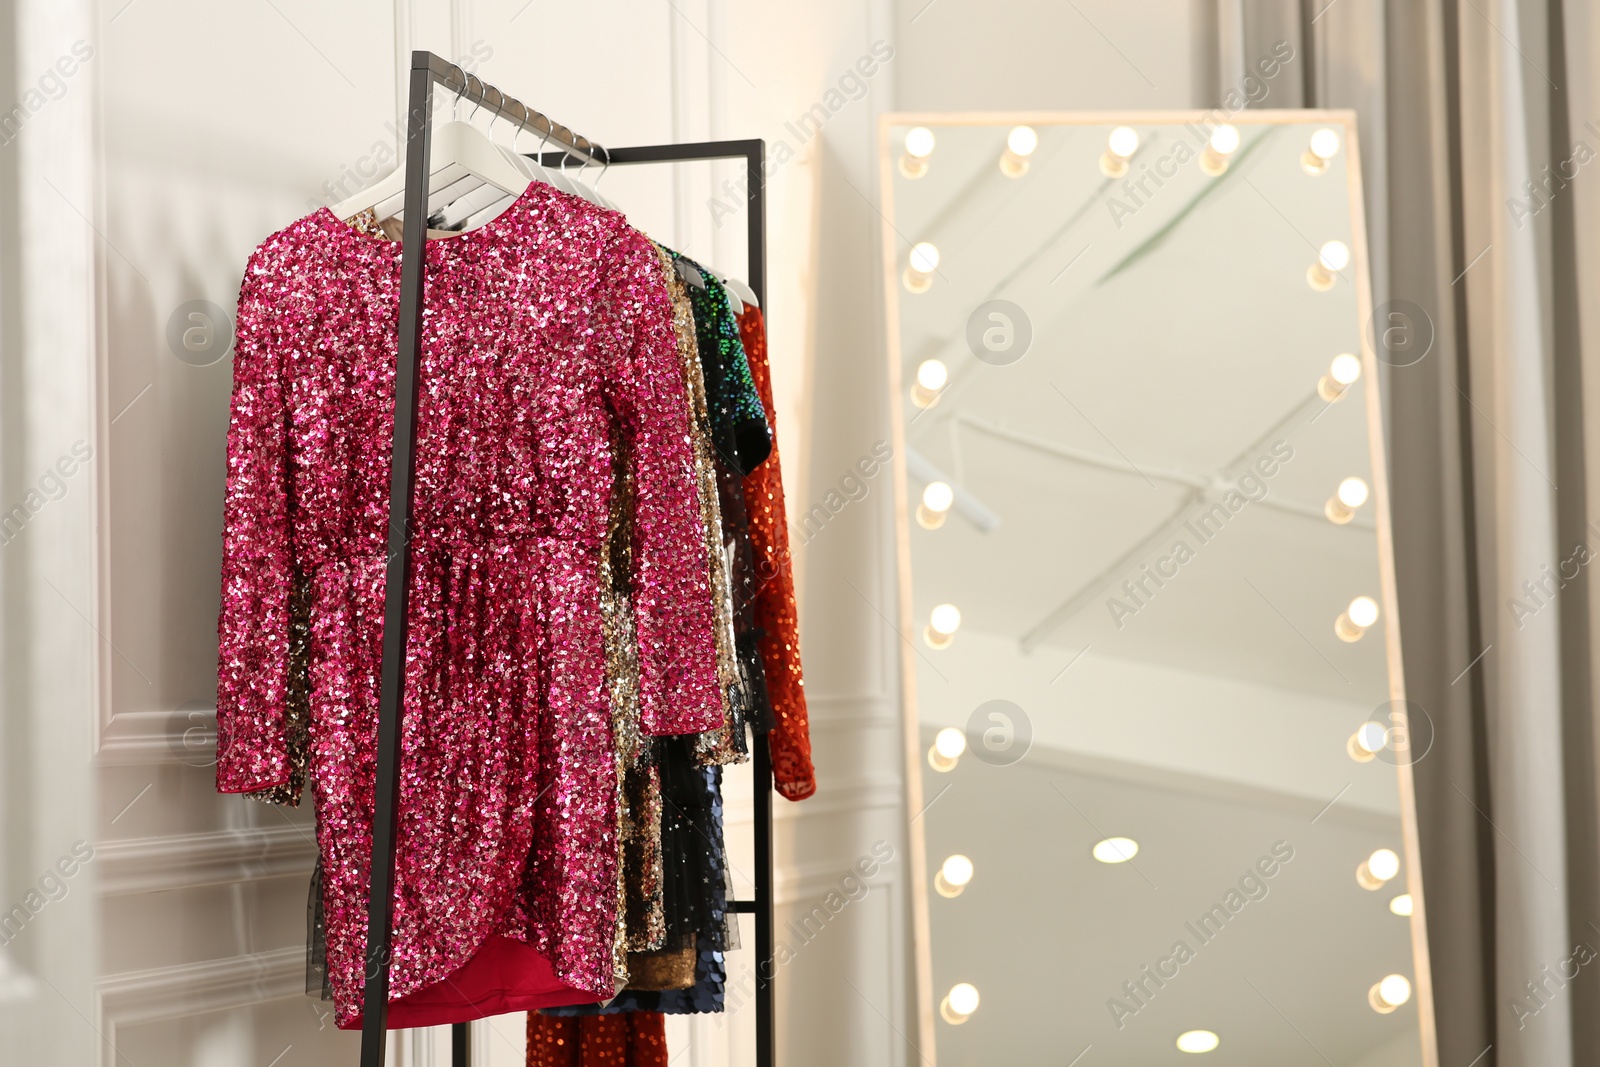 Photo of Clothing rack with colorful sequin party dresses on hangers near mirror in boutique, space for text